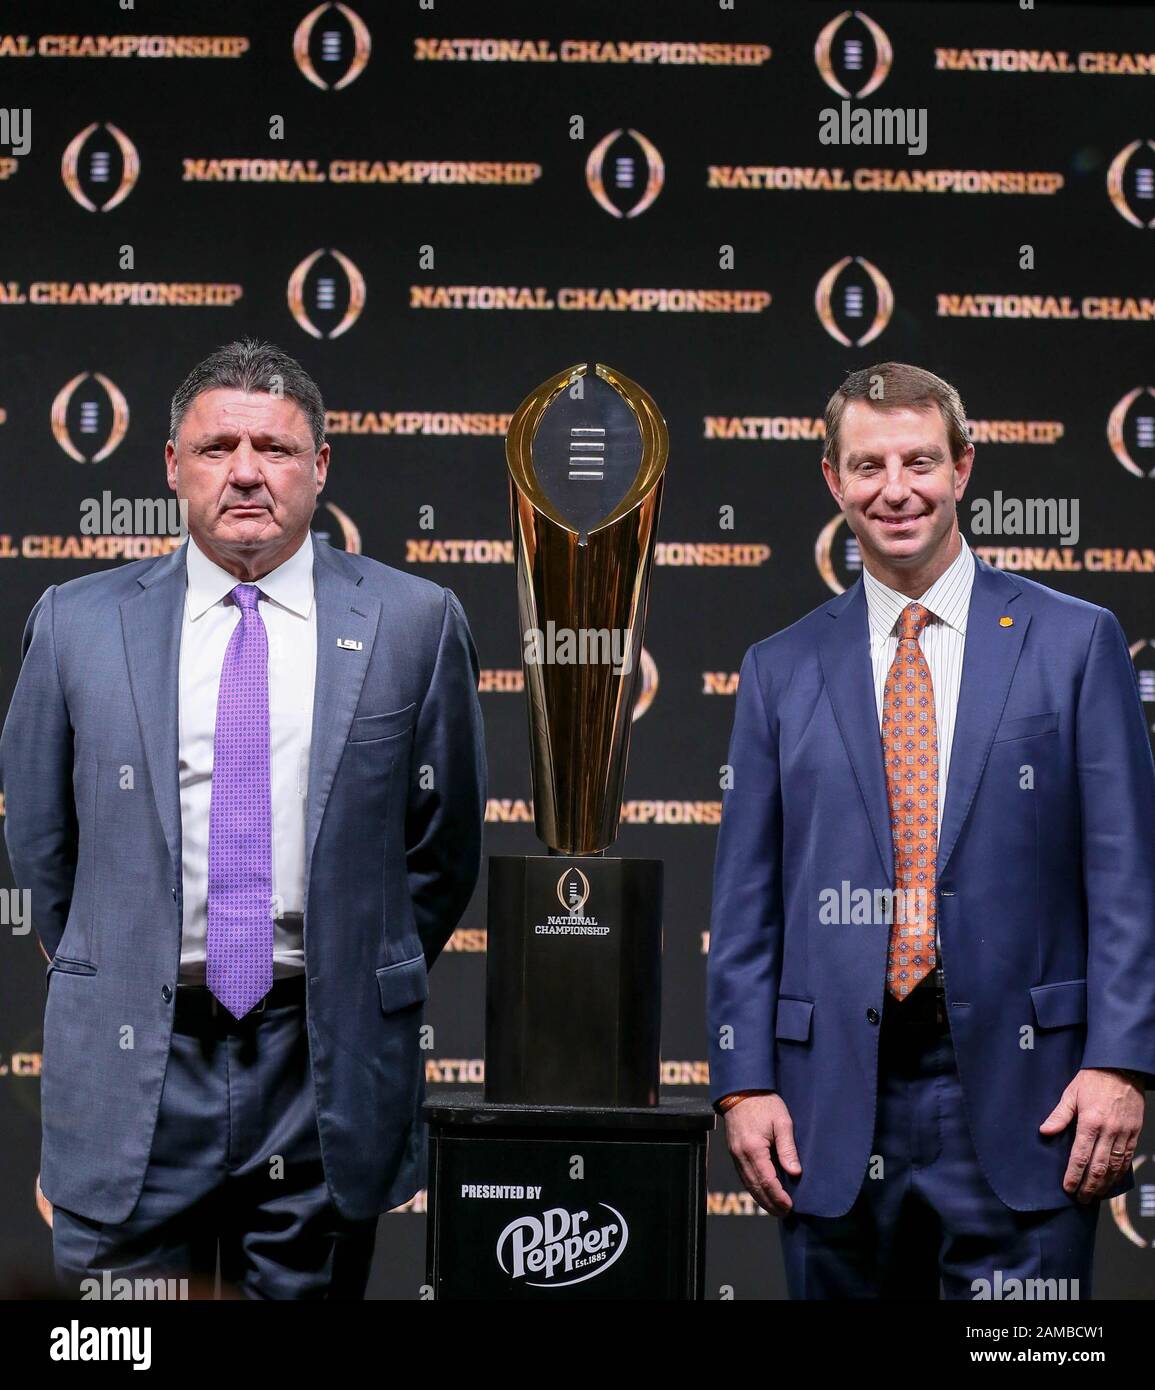 New Orleans, LA, USA. 12th Jan, 2020. LSU Head Coach Ed Orgeron and Clemson Head Coach Dabo Swinney pose with the Championship Trophy after the Head Coaches Press Conference before the College Football National Championship between the Clemson Tigers and the LSU Tigers at the Sheraton Hotel in New Orleans, LA. Jonathan Mailhes/CSM/Alamy Live News Stock Photo